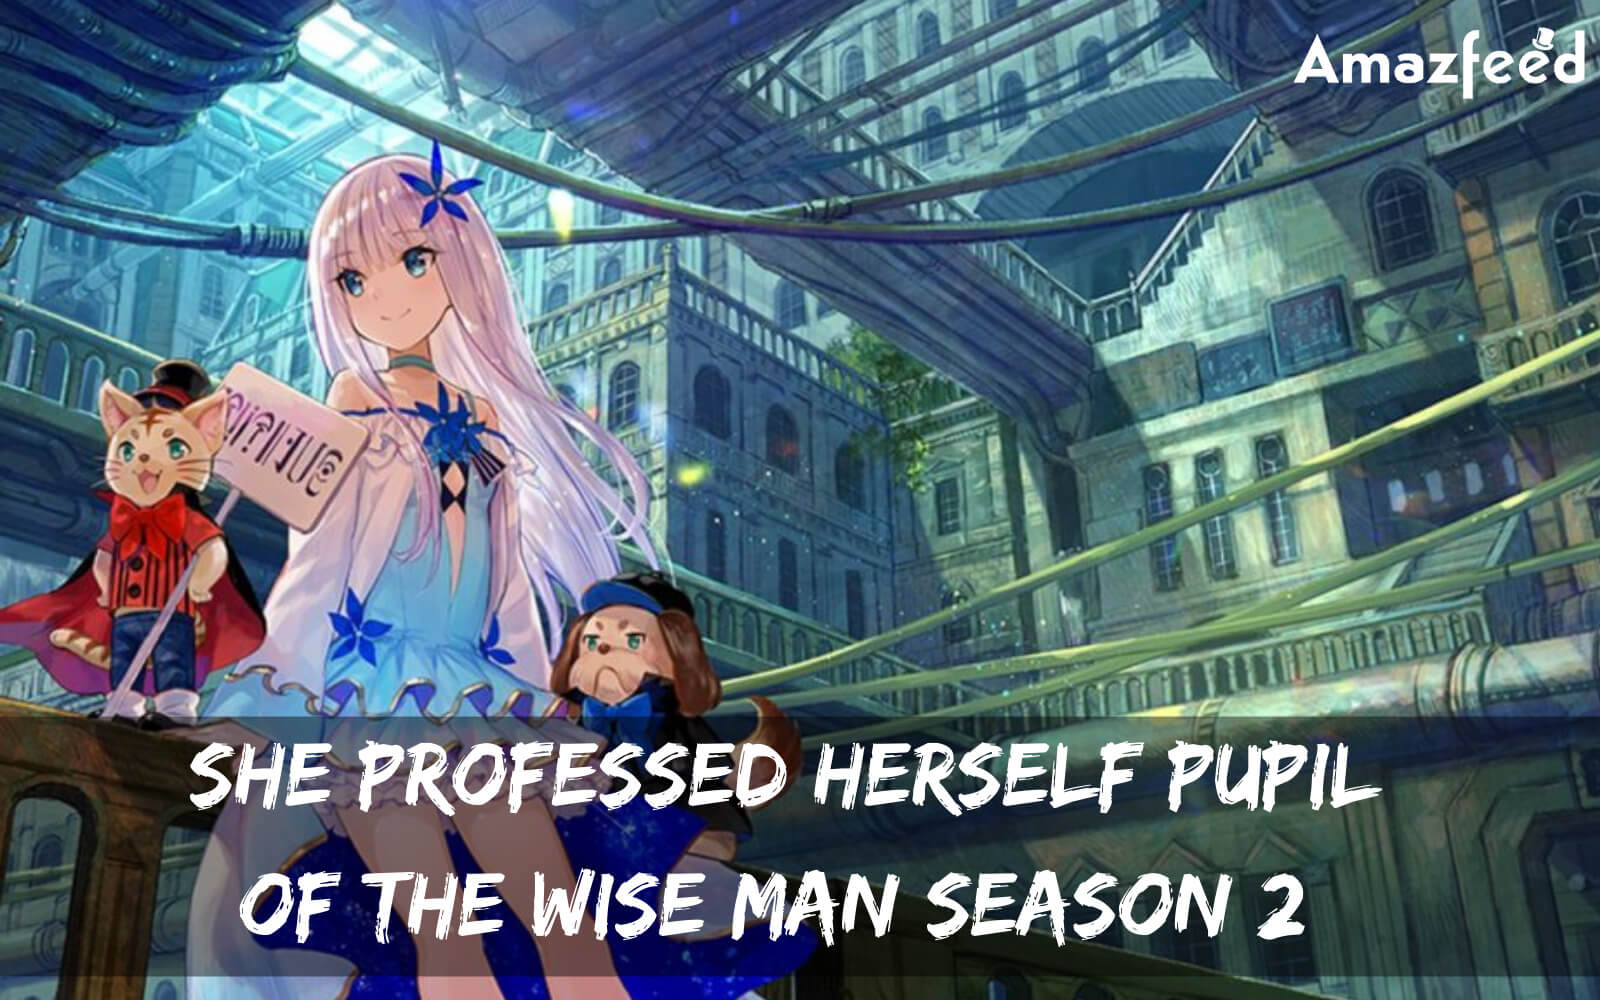 She Professed Herself Pupil of the Wise Man Season 2